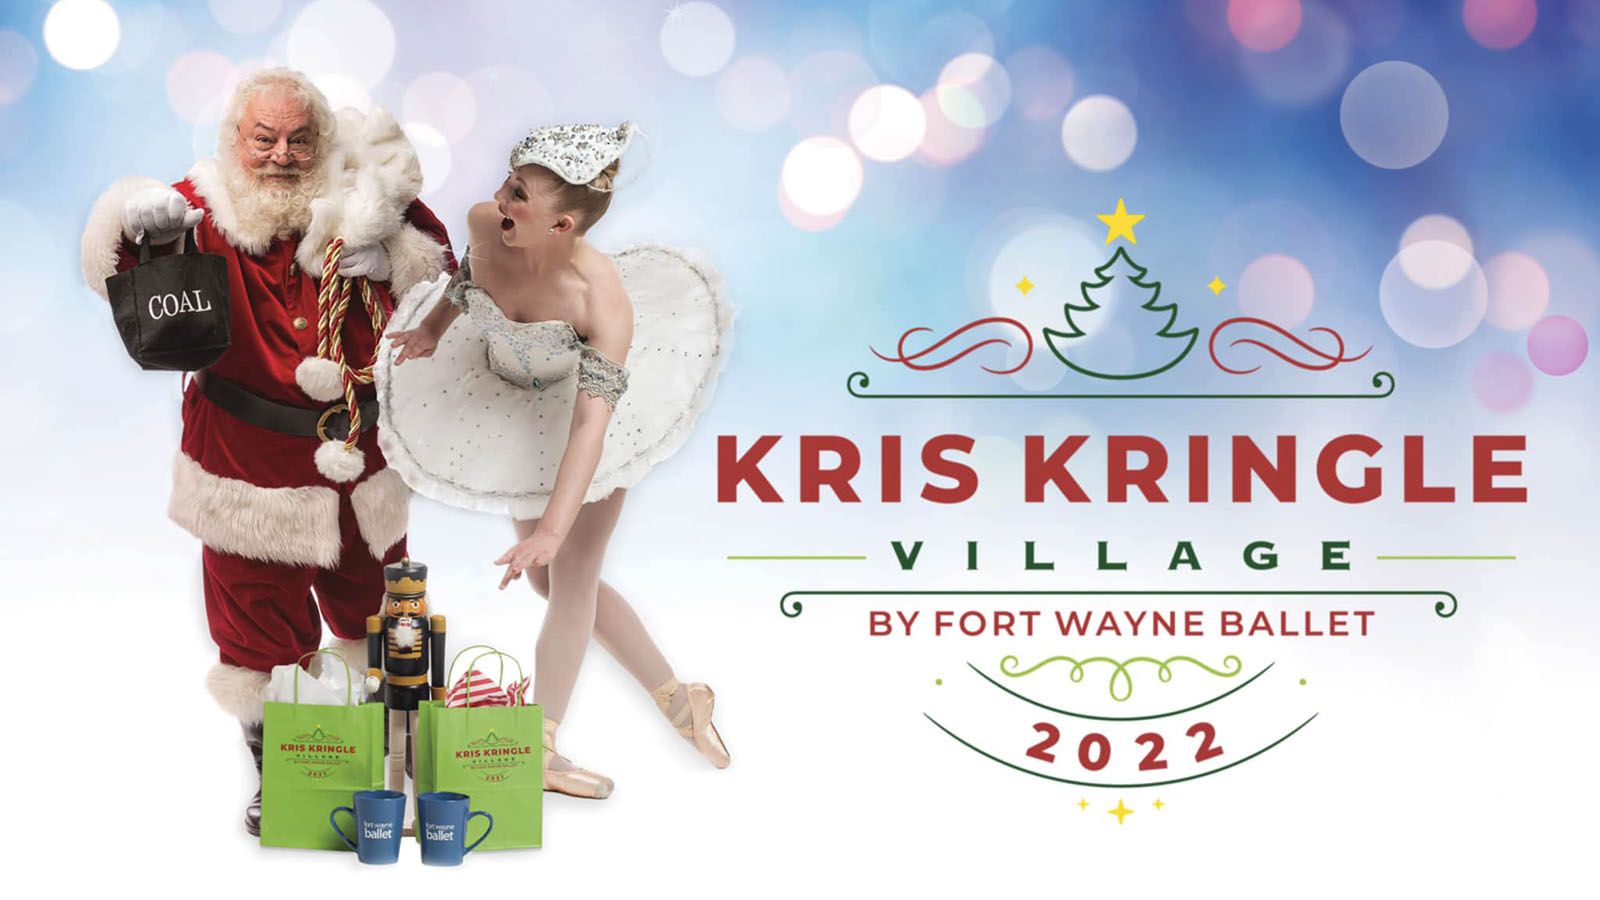 Kris Kringle Village will be held at the Arts Campus from Friday-Sunday through Dec. 11.